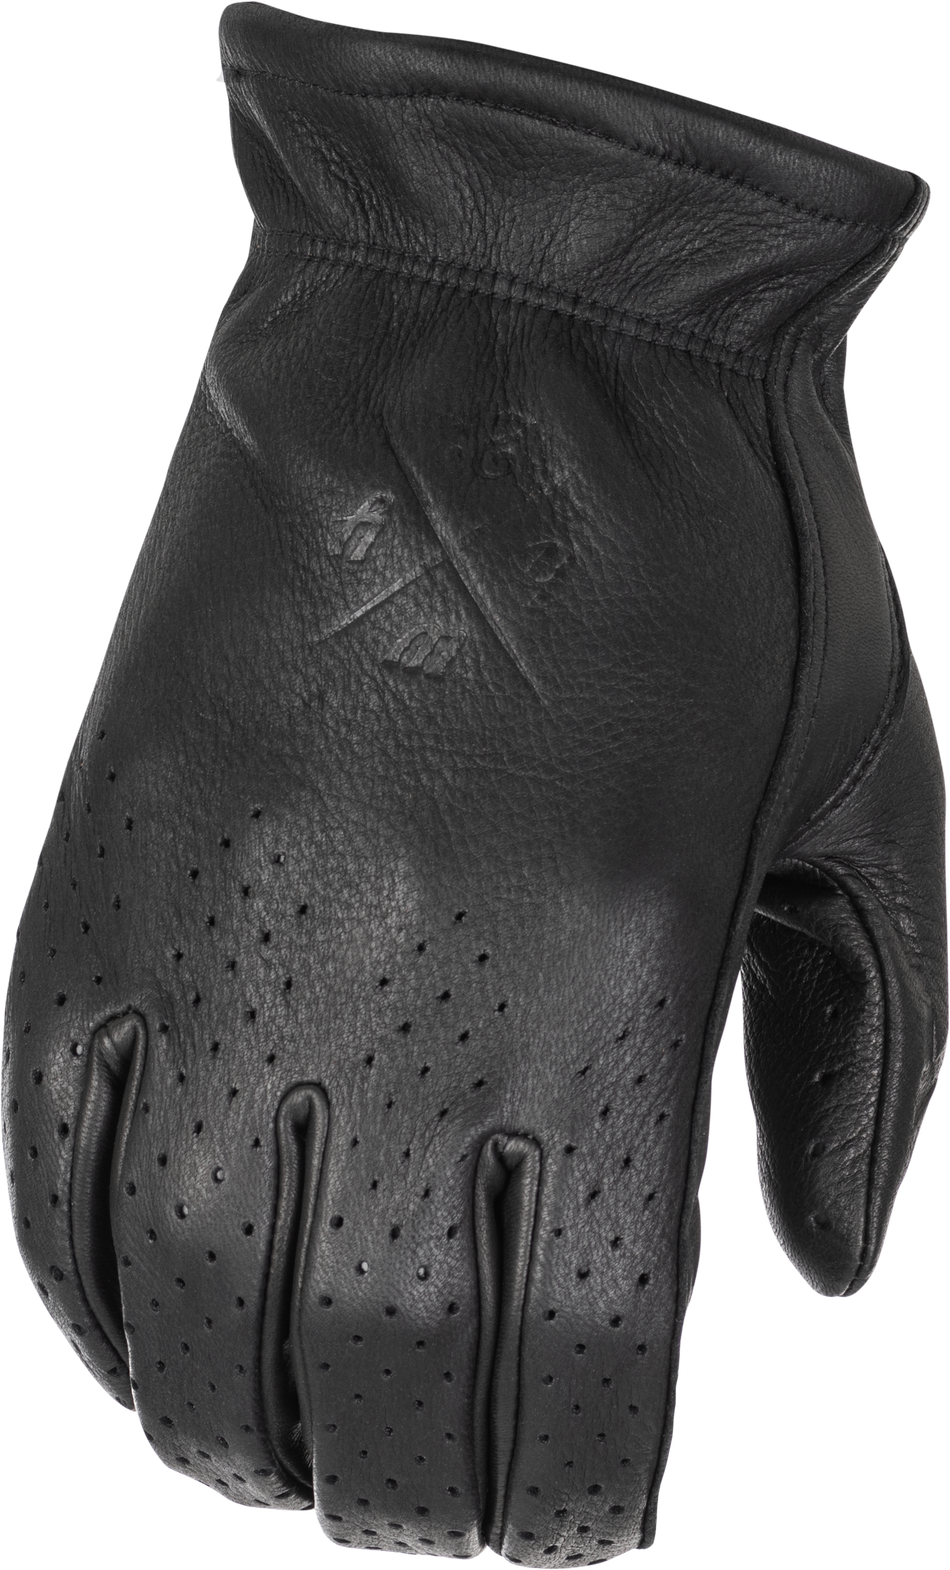 HIGHWAY 21 Louie Perforated Gloves Black Md 489-0050M